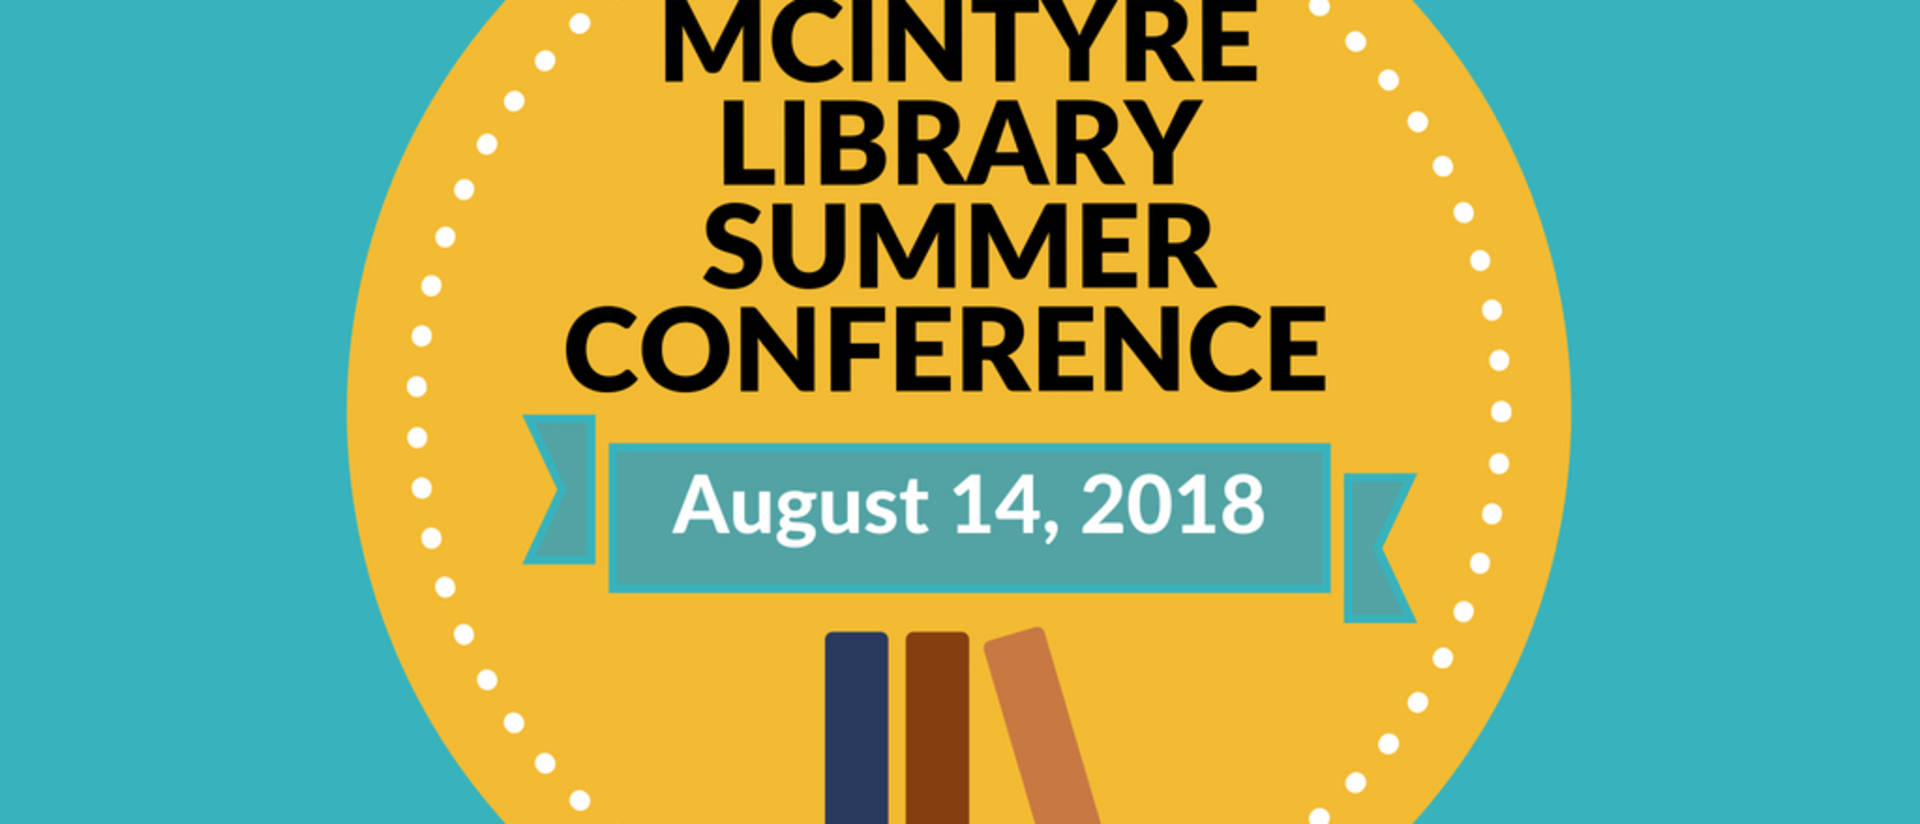 McIntyre Summer Conference Save the Date August 14